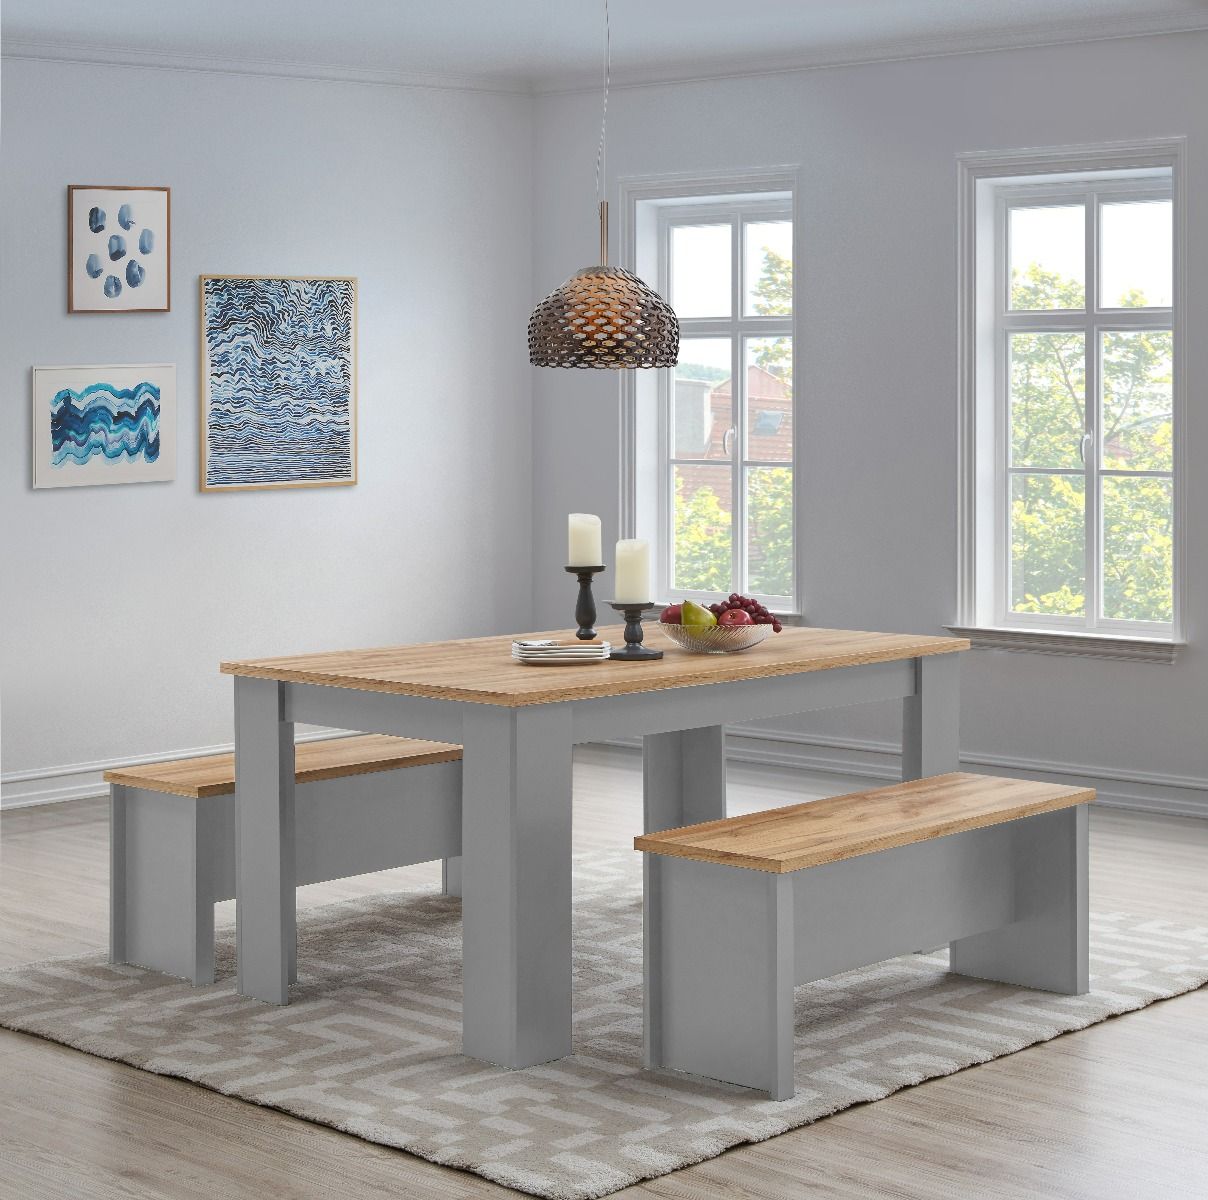 Cisnon Light Grey Dining Table 150 Cm With 2 Benches Light Grey